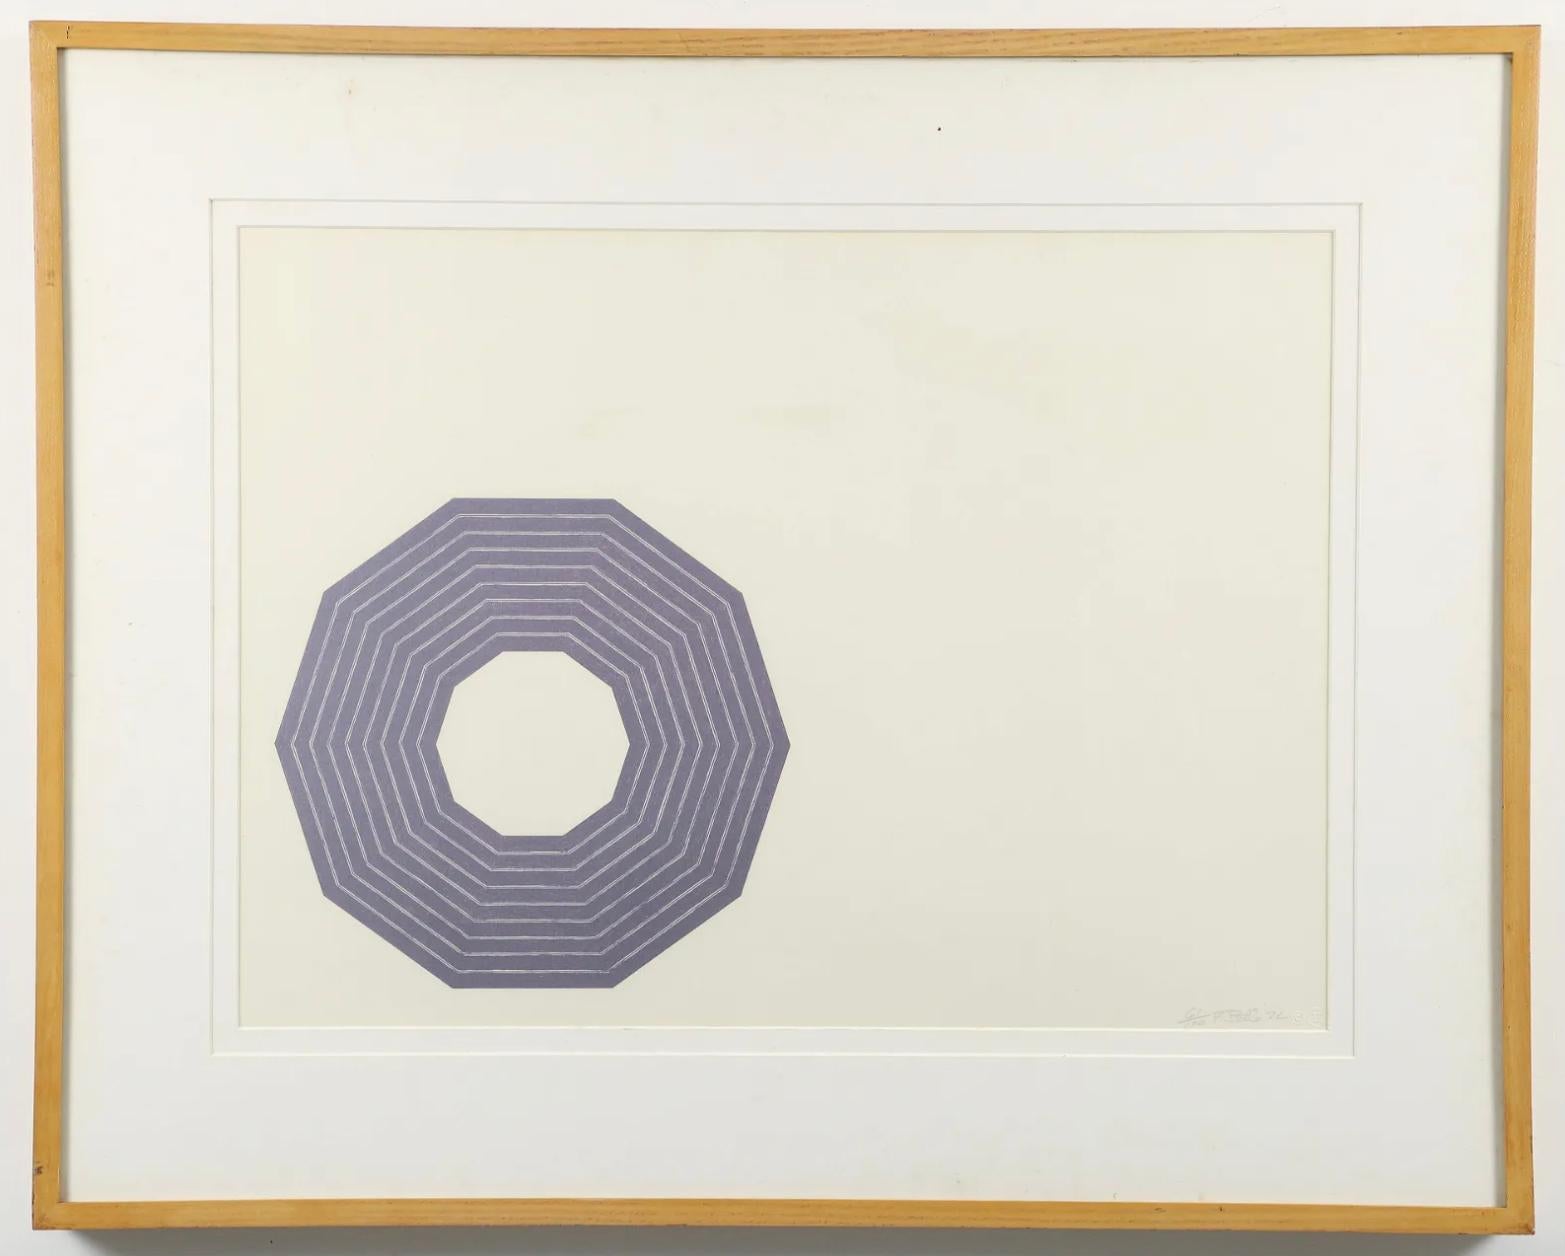 Frank Stella 'Kay Bearman' from the Purple Series Signed Lithograph 1972 For Sale 1